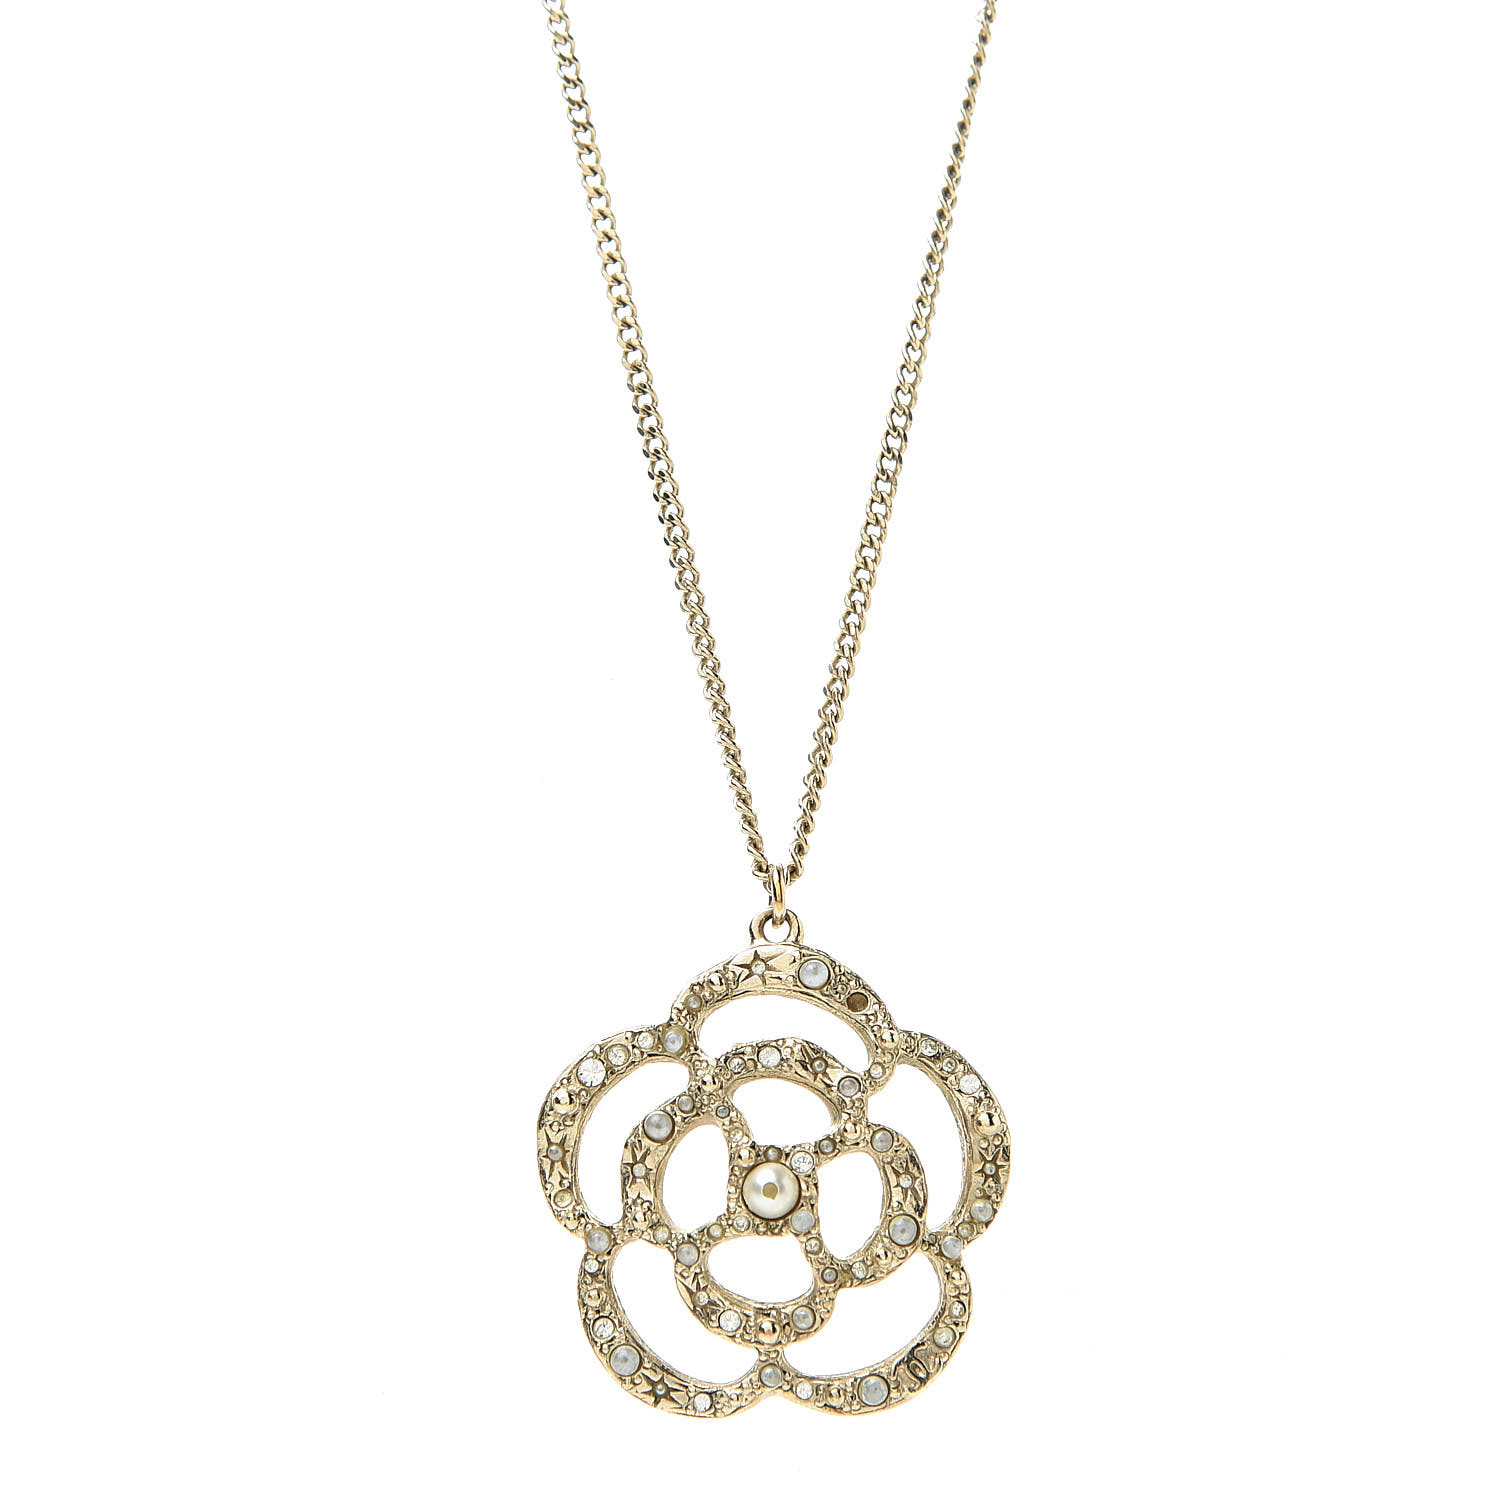 CHANEL Crystal Pearl Camellia Necklace Gold 522047 | FASHIONPHILE